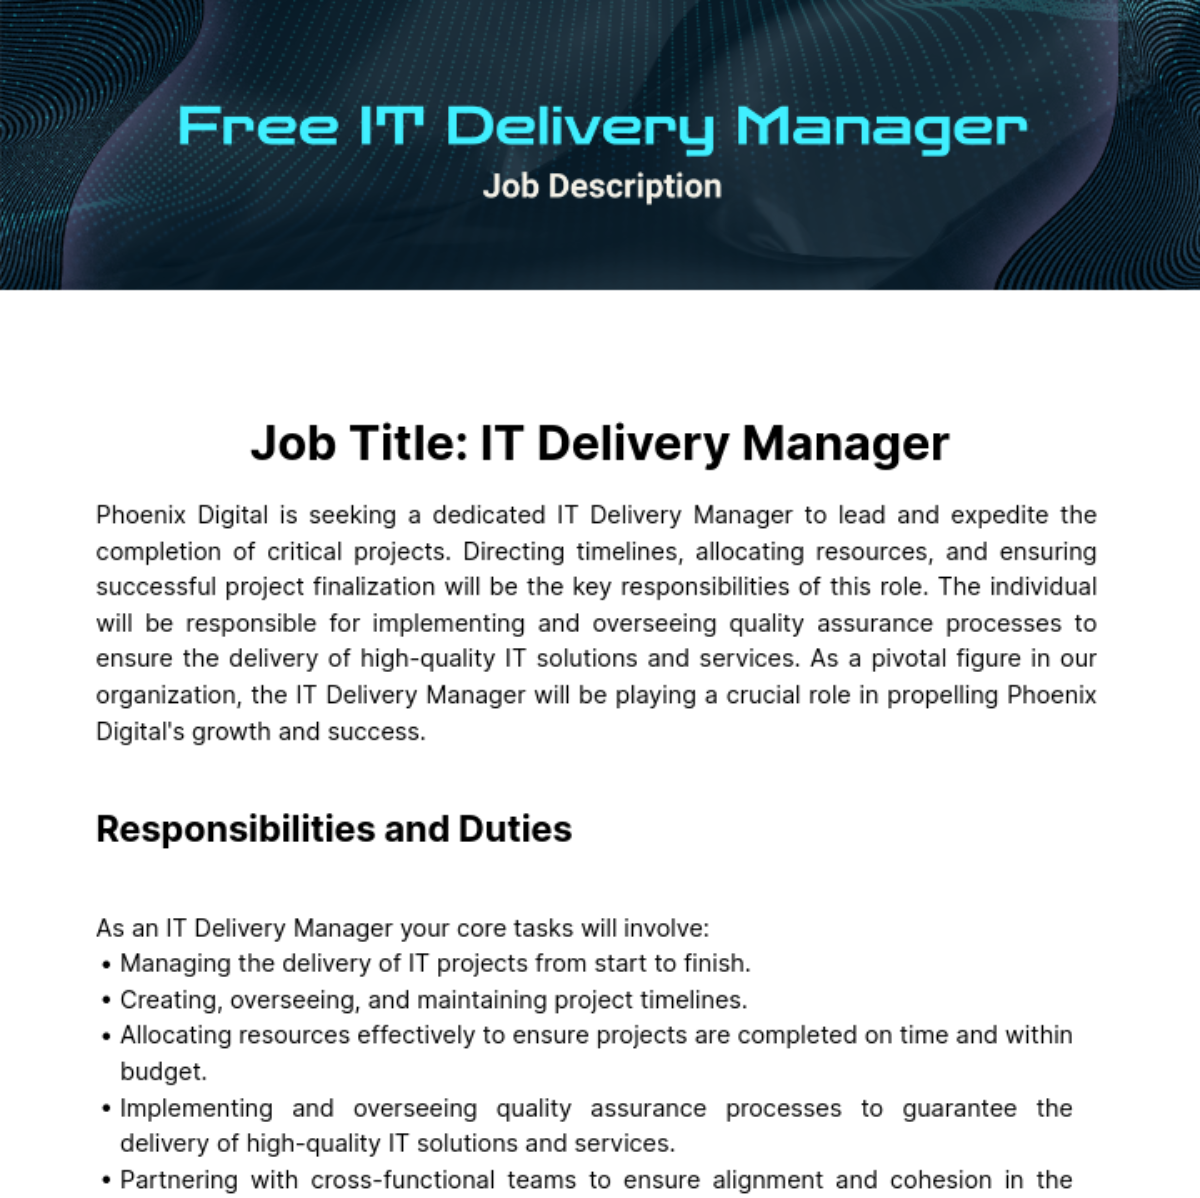 Free IT Delivery Manager Job Description Template